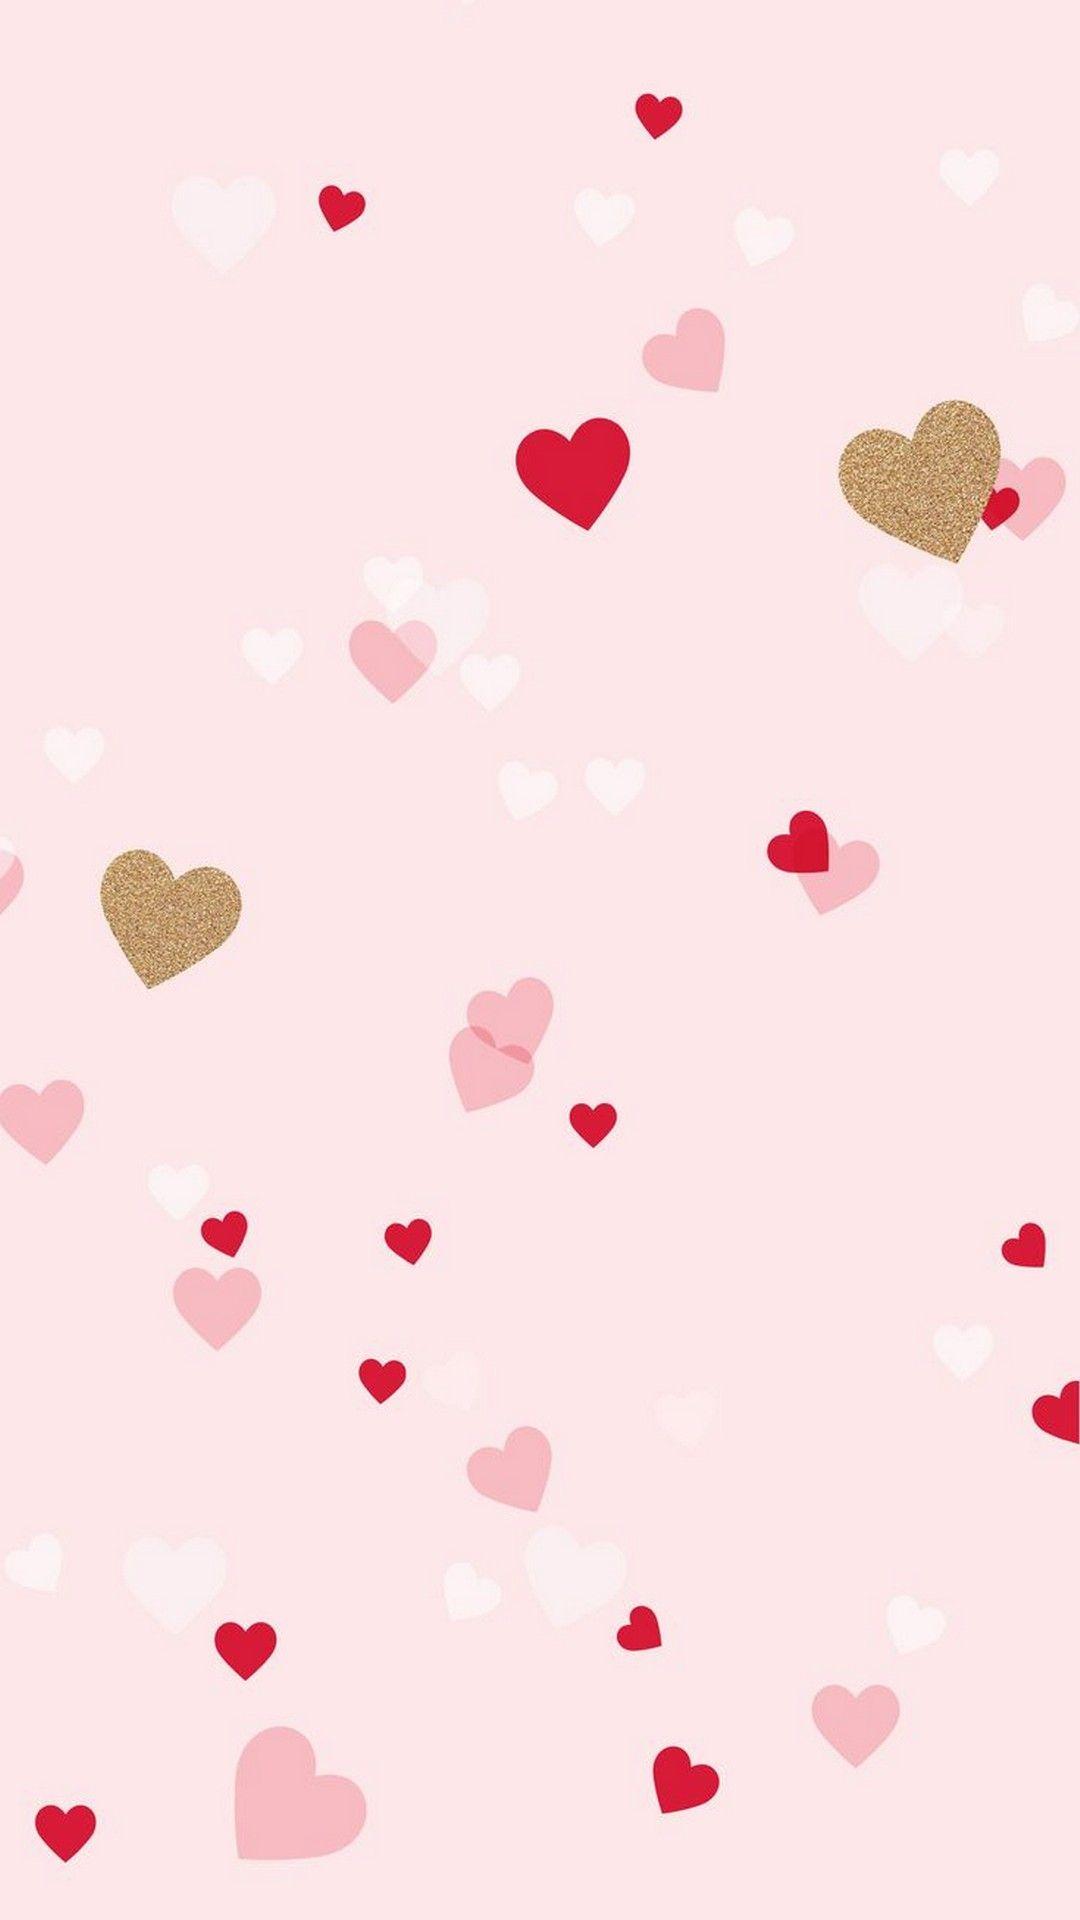 Valentine Wallpaper For iPhone 7 iPhone Wallpaper. iPhone wallpaper girly, Valentines wallpaper, Wallpaper iphone cute